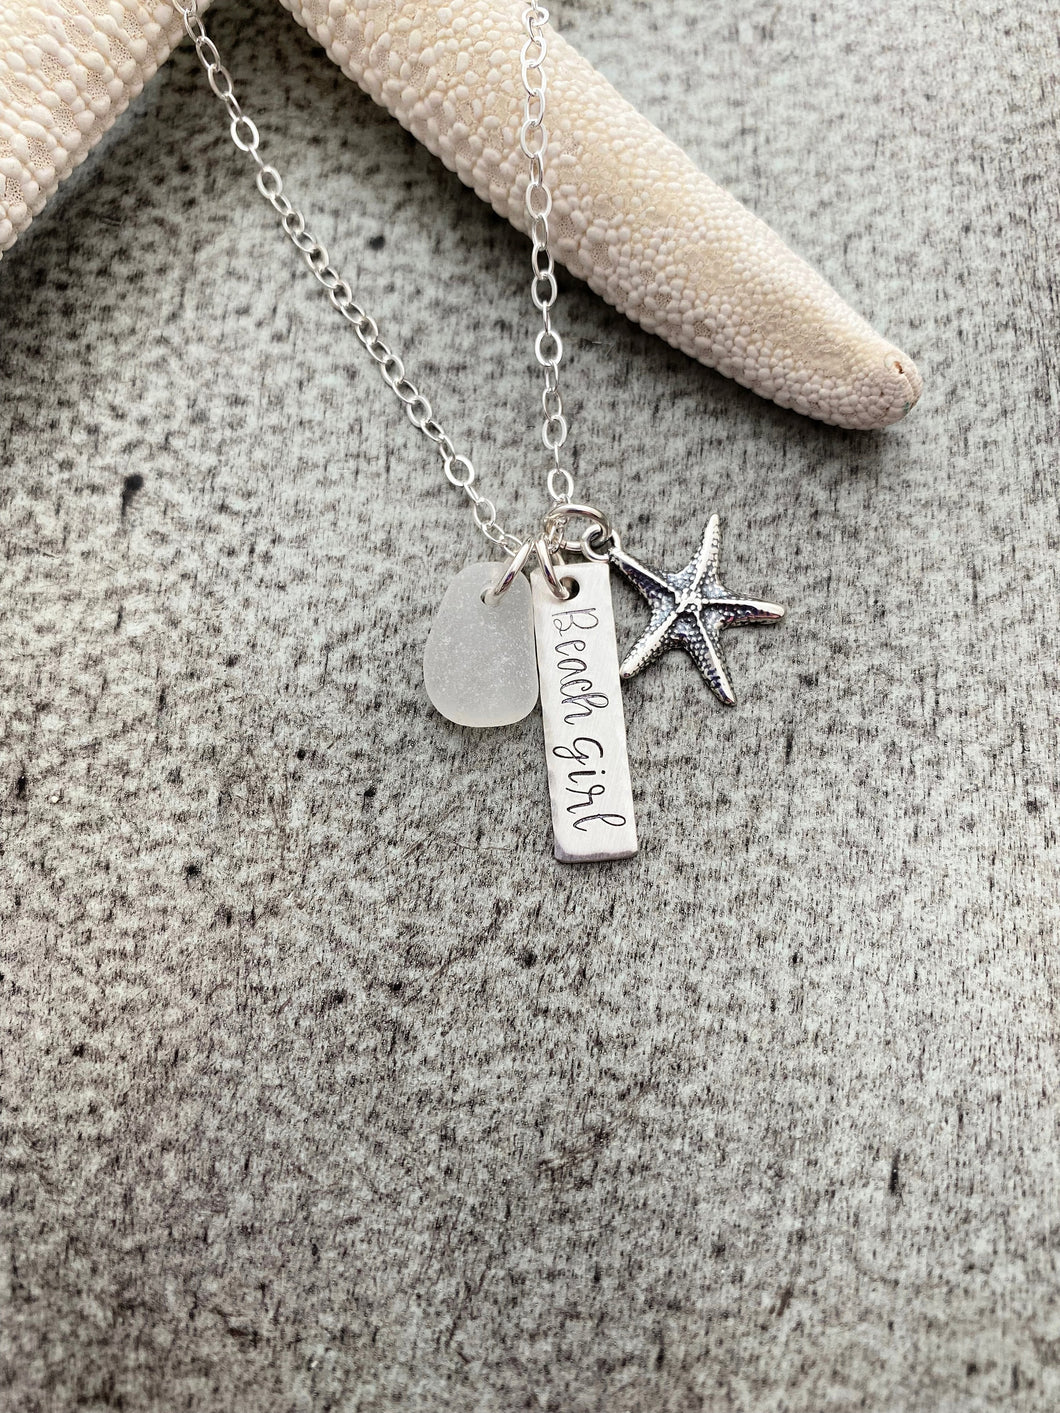 Genuine Sea Glass Beach Girl Necklace - Personalized Choice of Color - Sterling Silver Starfish - SeaGlass Hand Stamped rectangle bar Beach